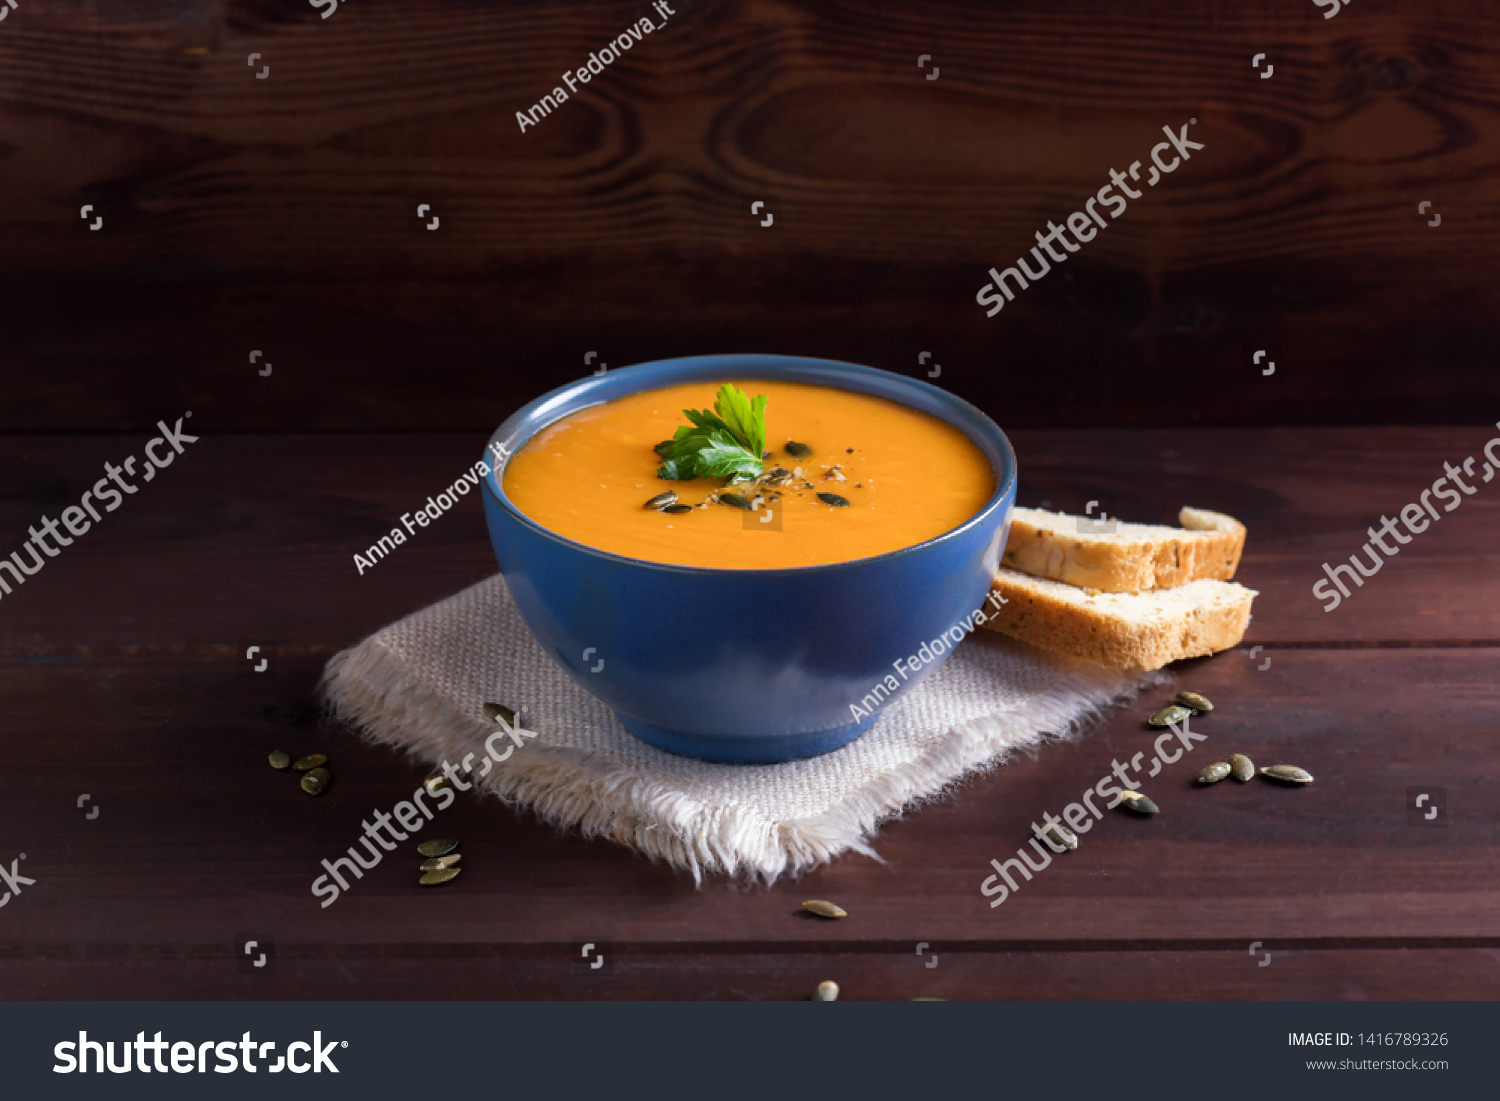 Pumpkin vegan soup in a blue bowl served with parsley, olive oil and pumpkin seeds and bread on a dark wooden background #1416789326